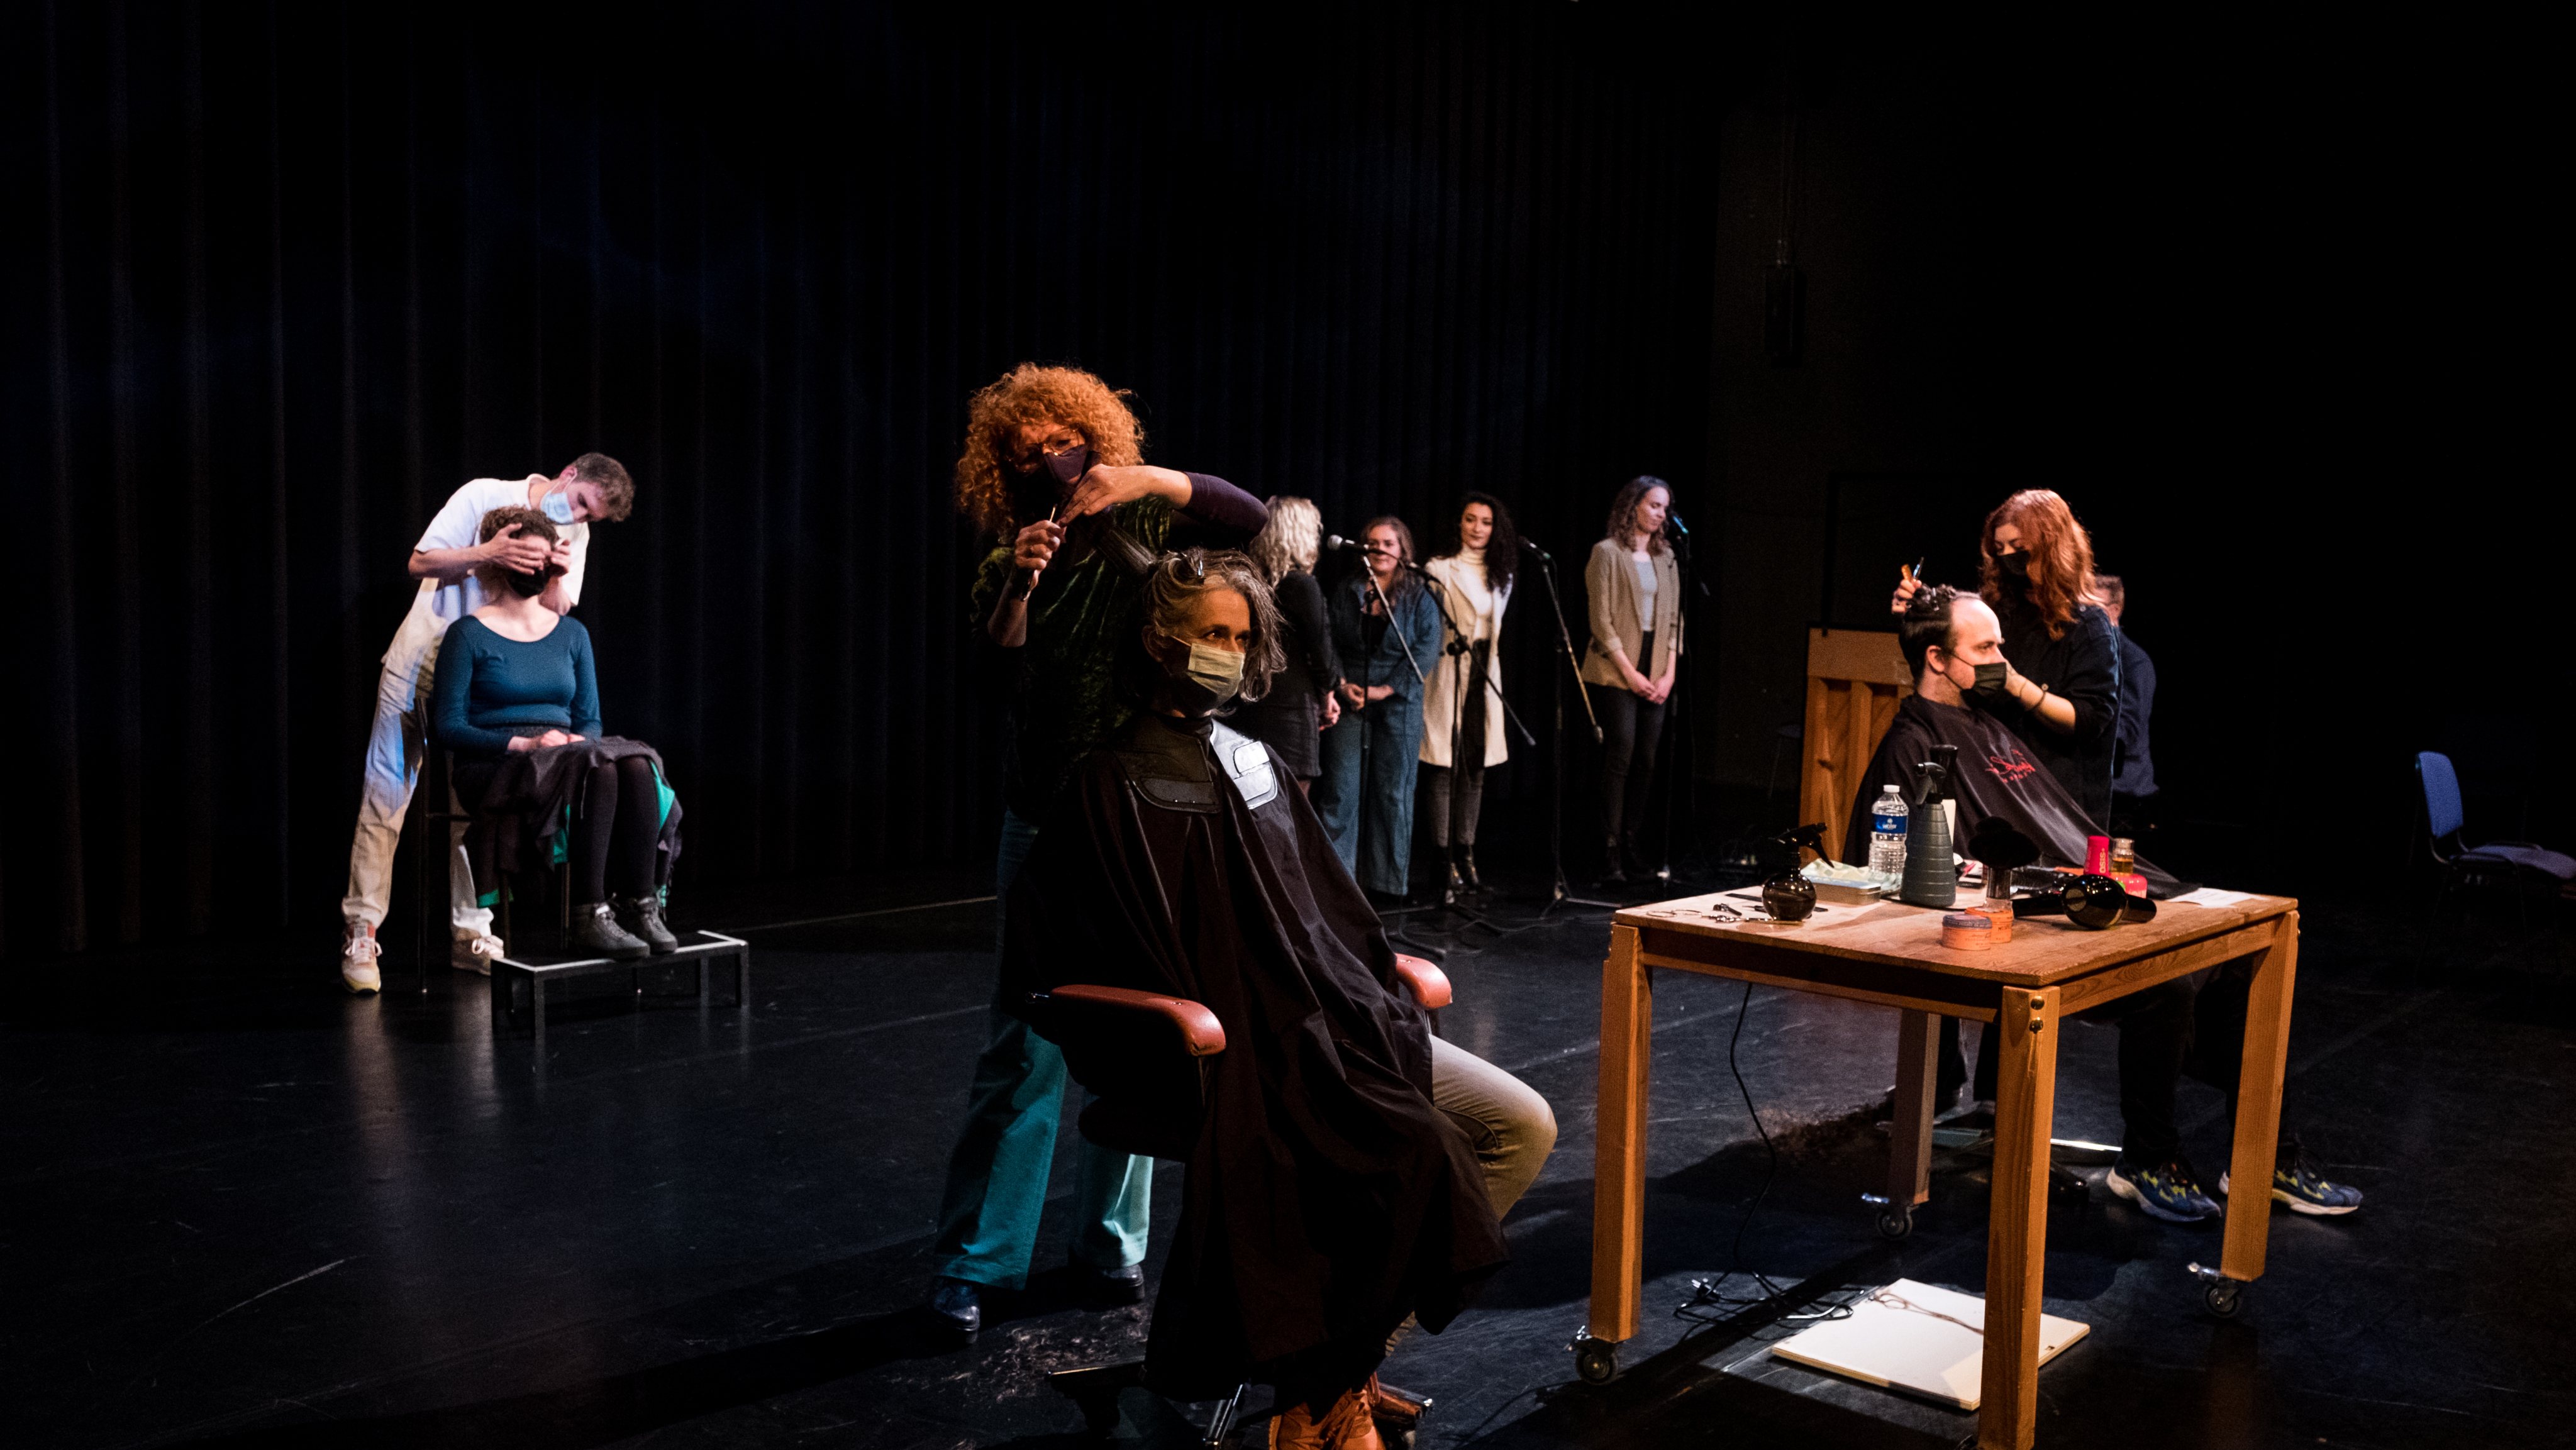 Dutch Theaters Host Haircuts To Highlight Covid Impact On Culture Sector